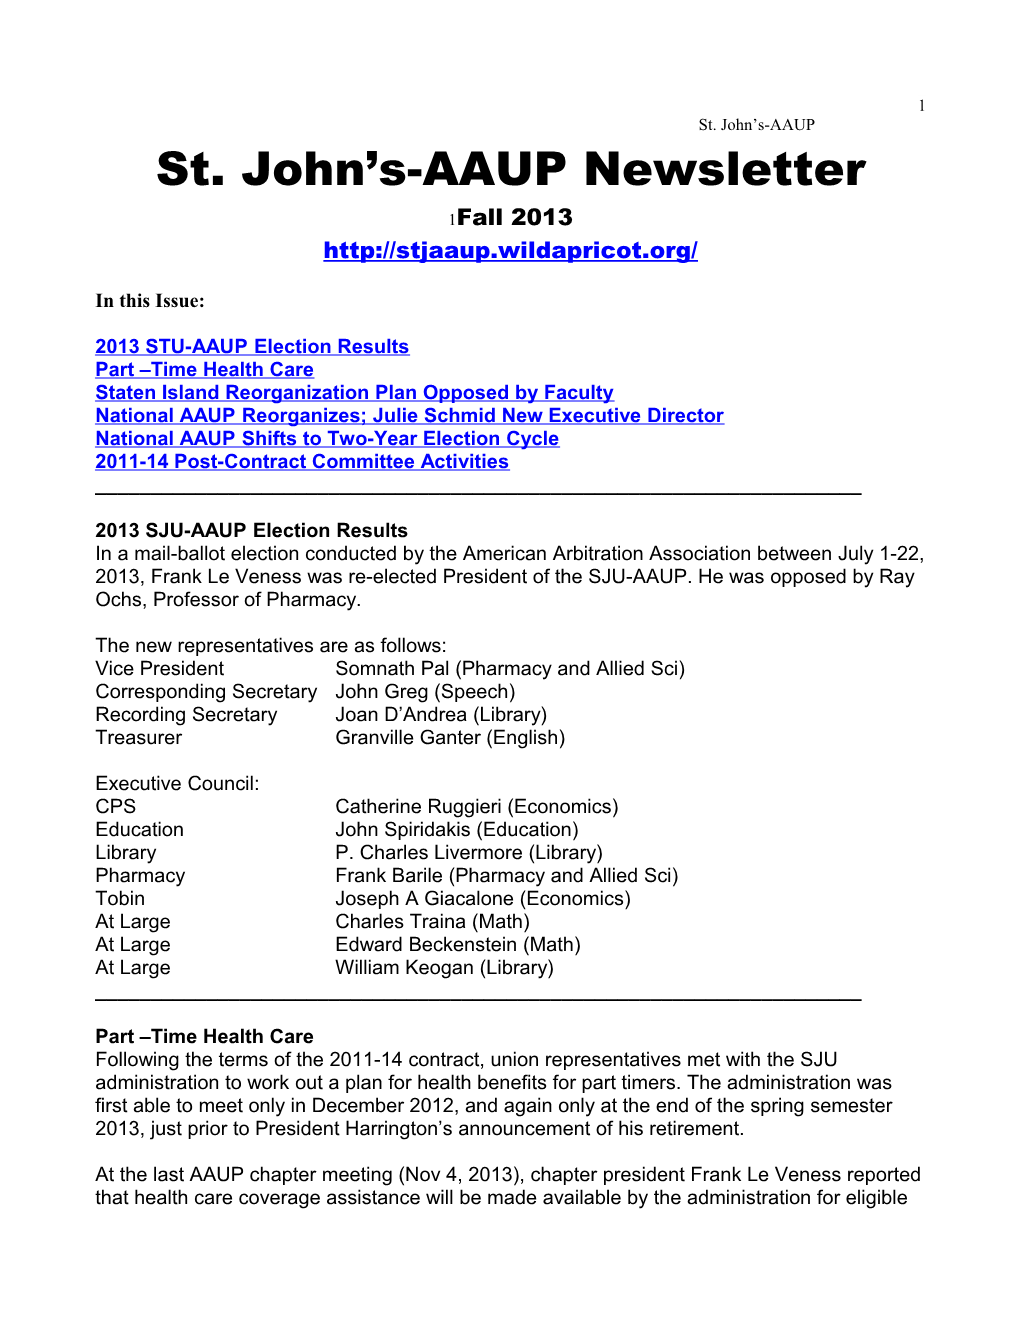 2013 STU-AAUP Election Results